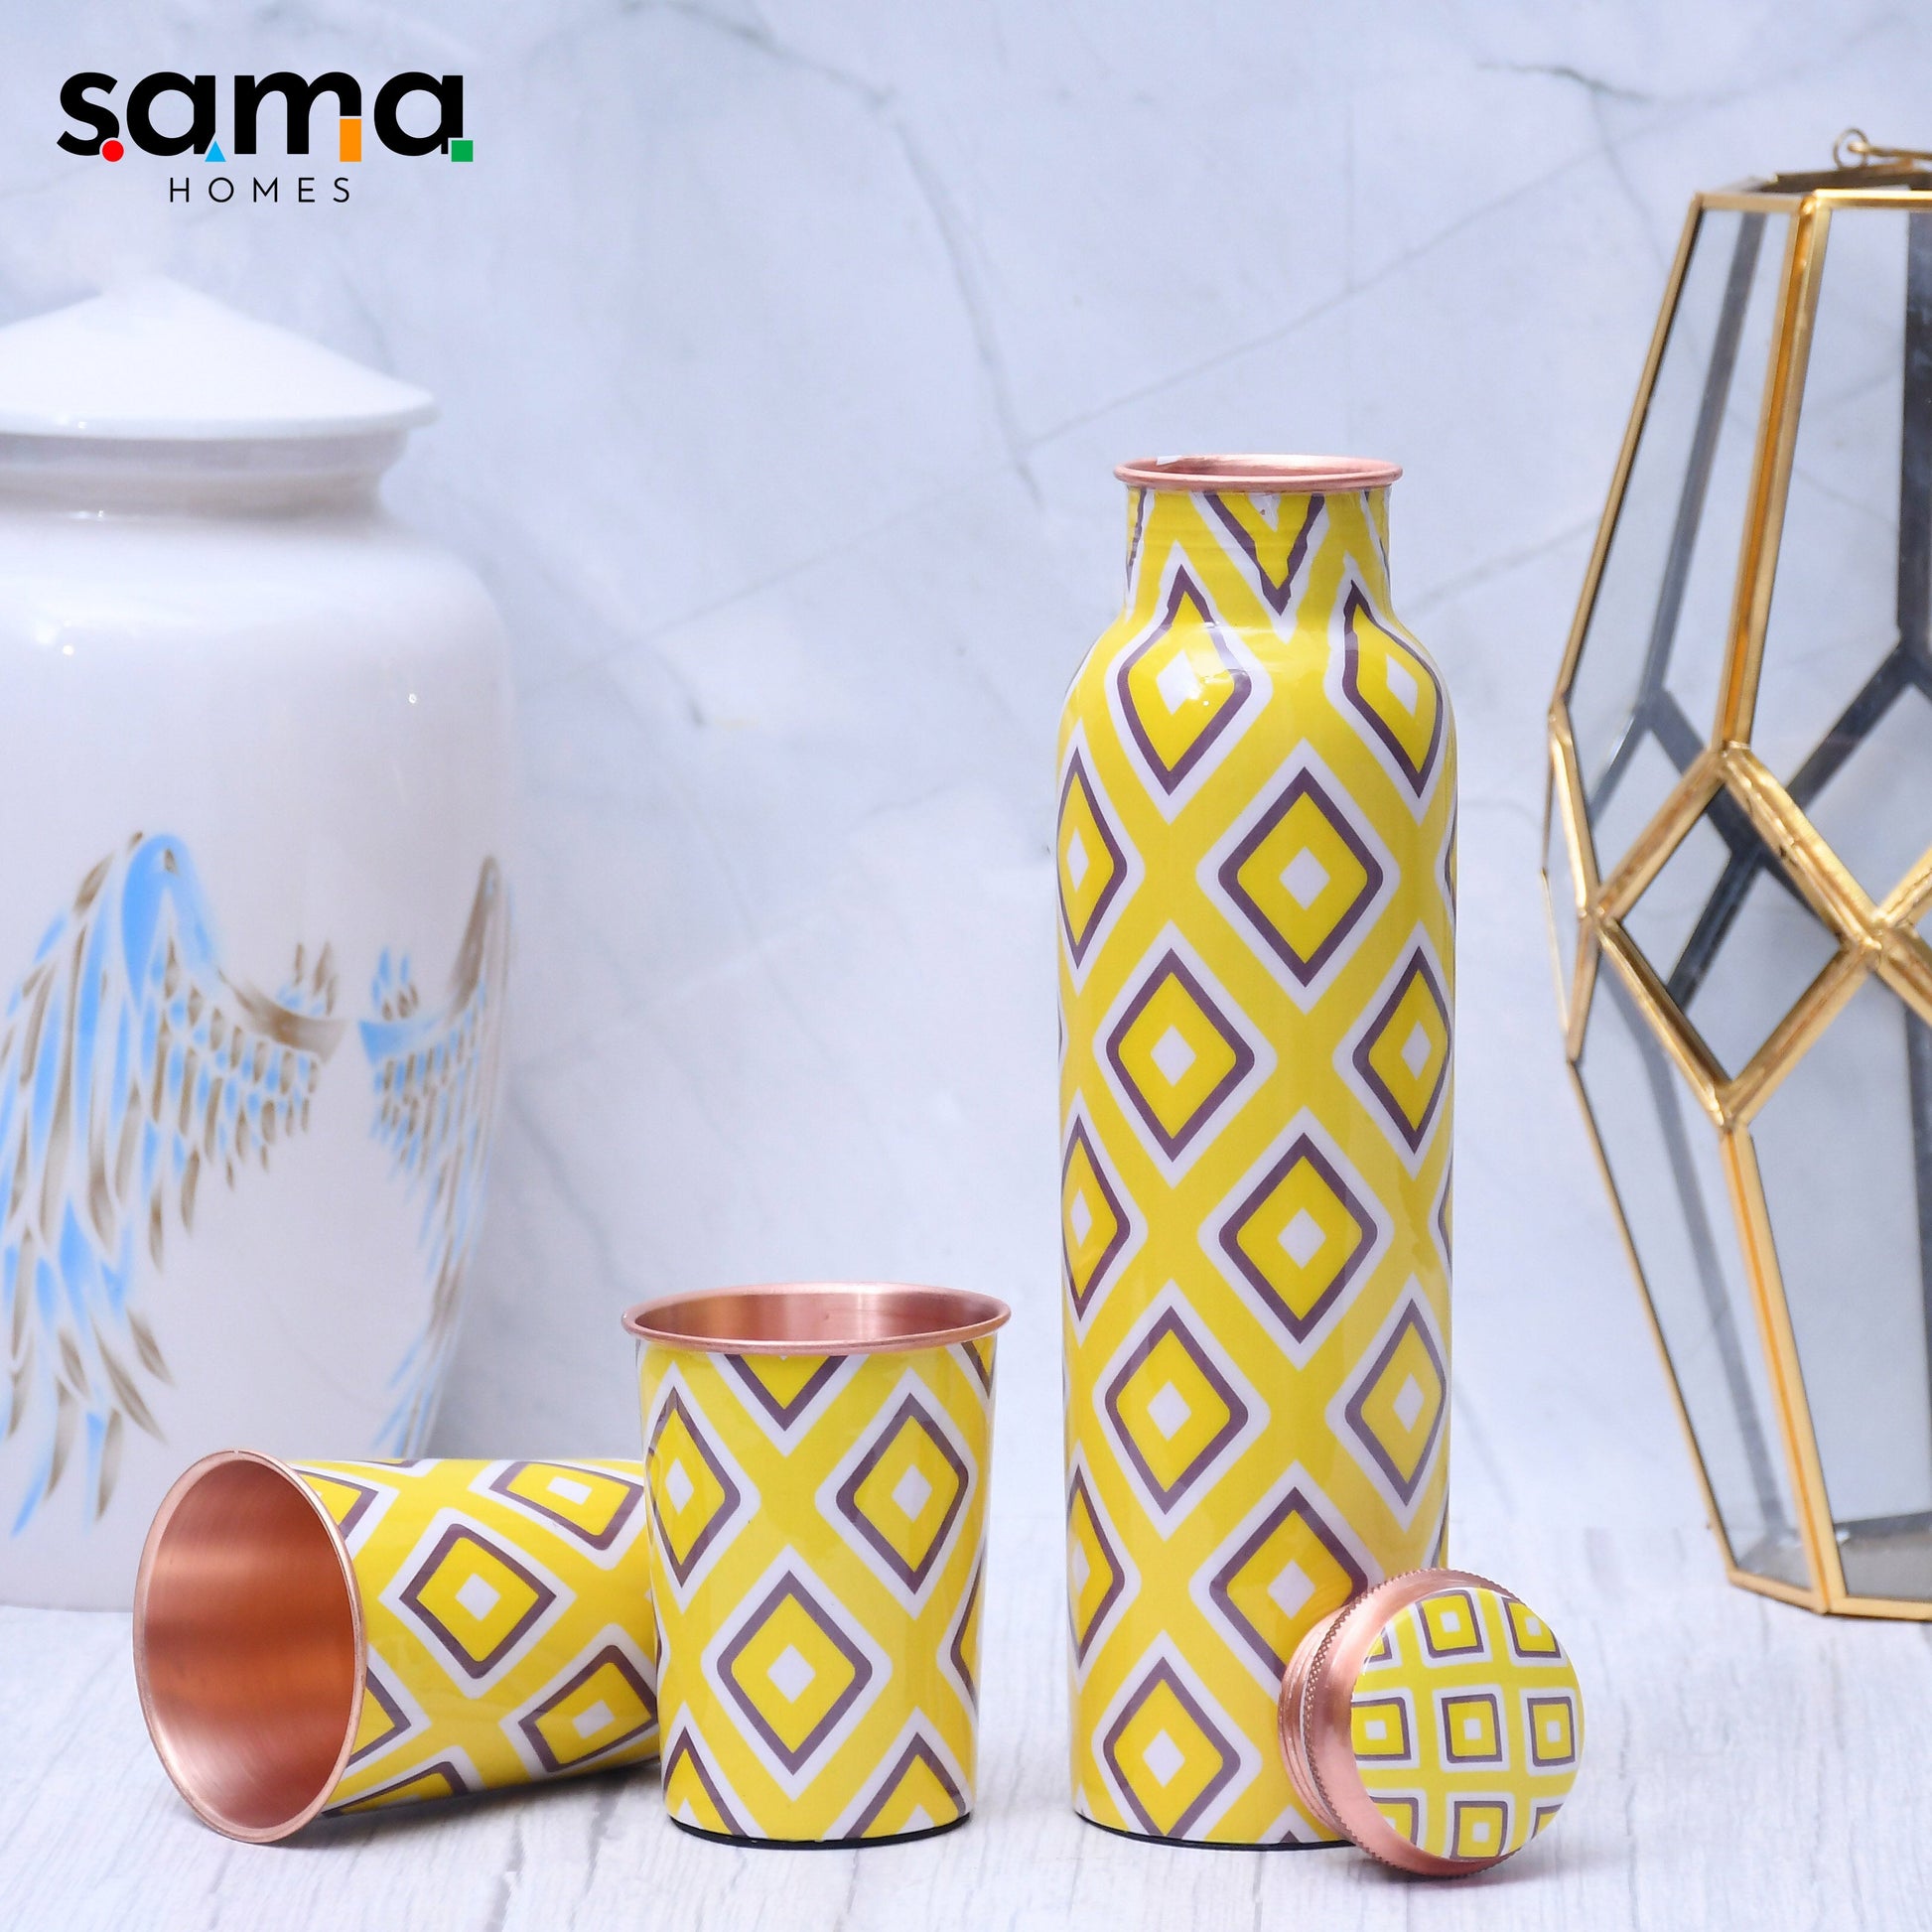 SAMA Homes - exclusive neon design printed copper bottle with 2 glasses tumbler set of 3